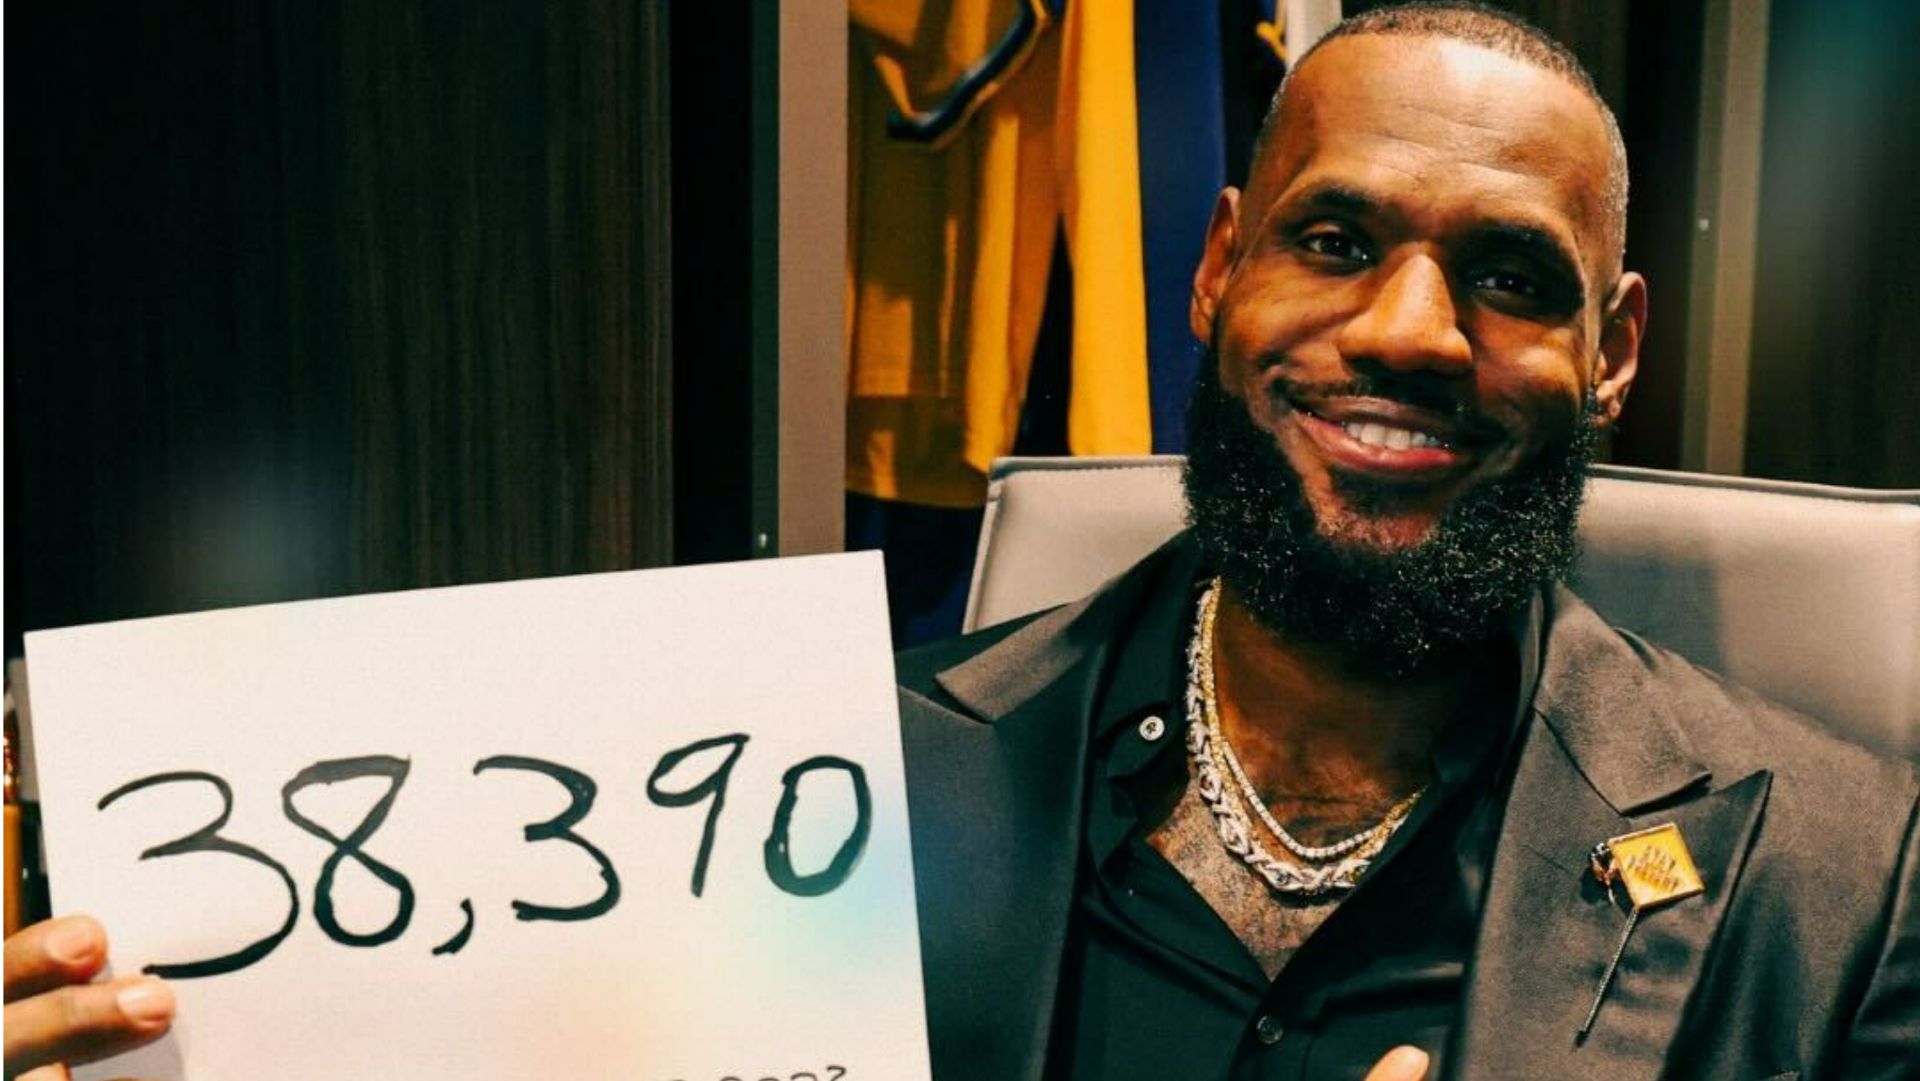 LeBron James confirmed he's not retiring anytime soon at the ESPYs